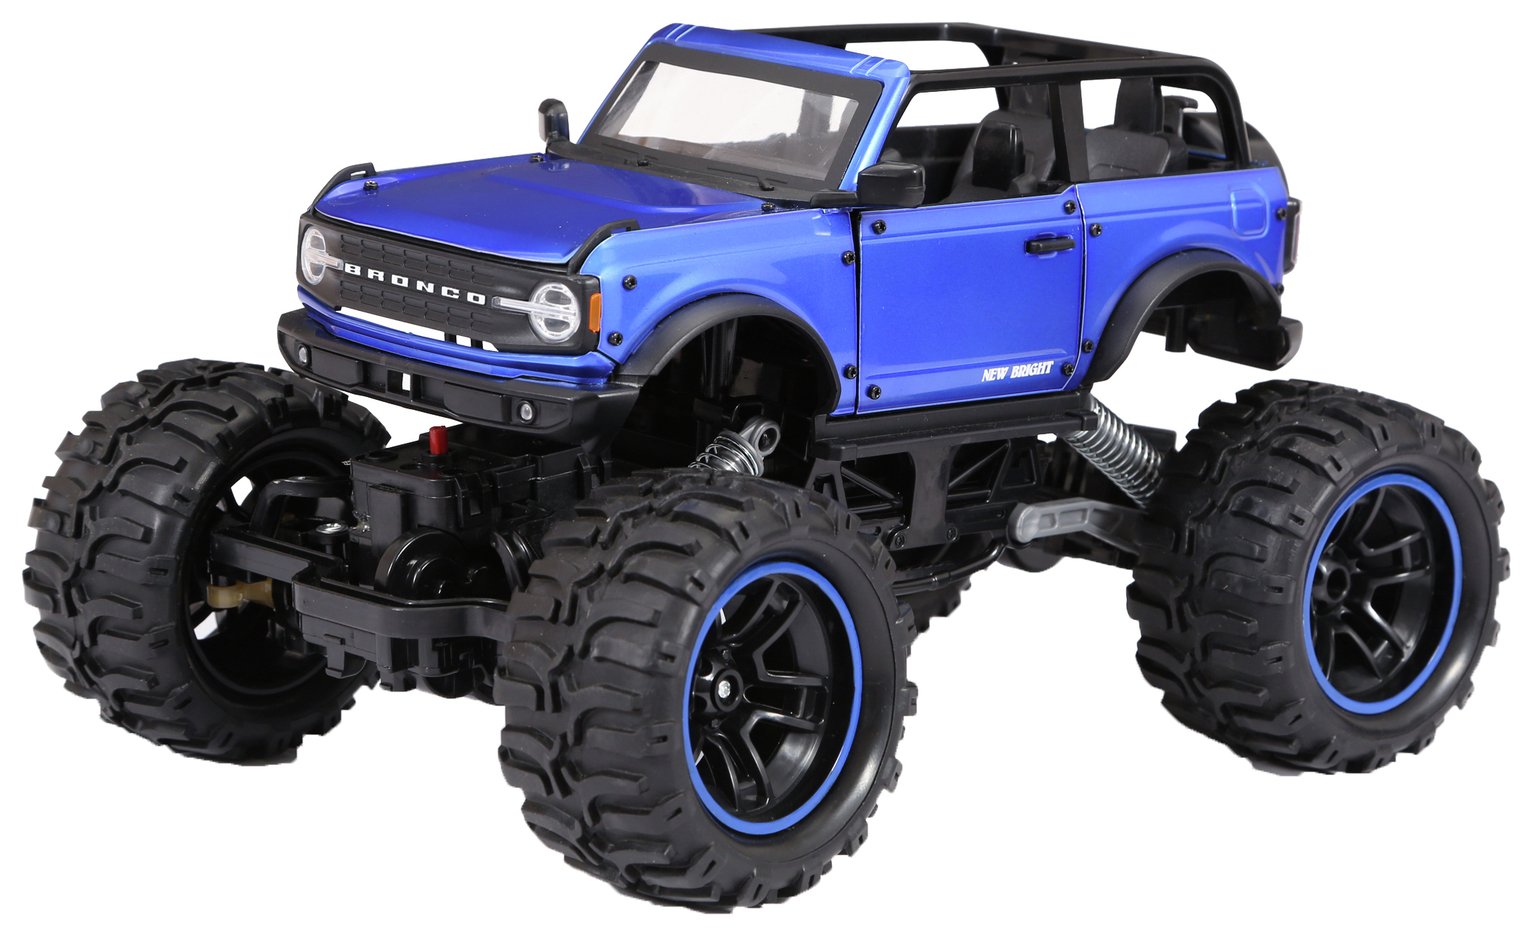 New Bright 1:14 Heavy Metal Bronco Remote Controlled Truck